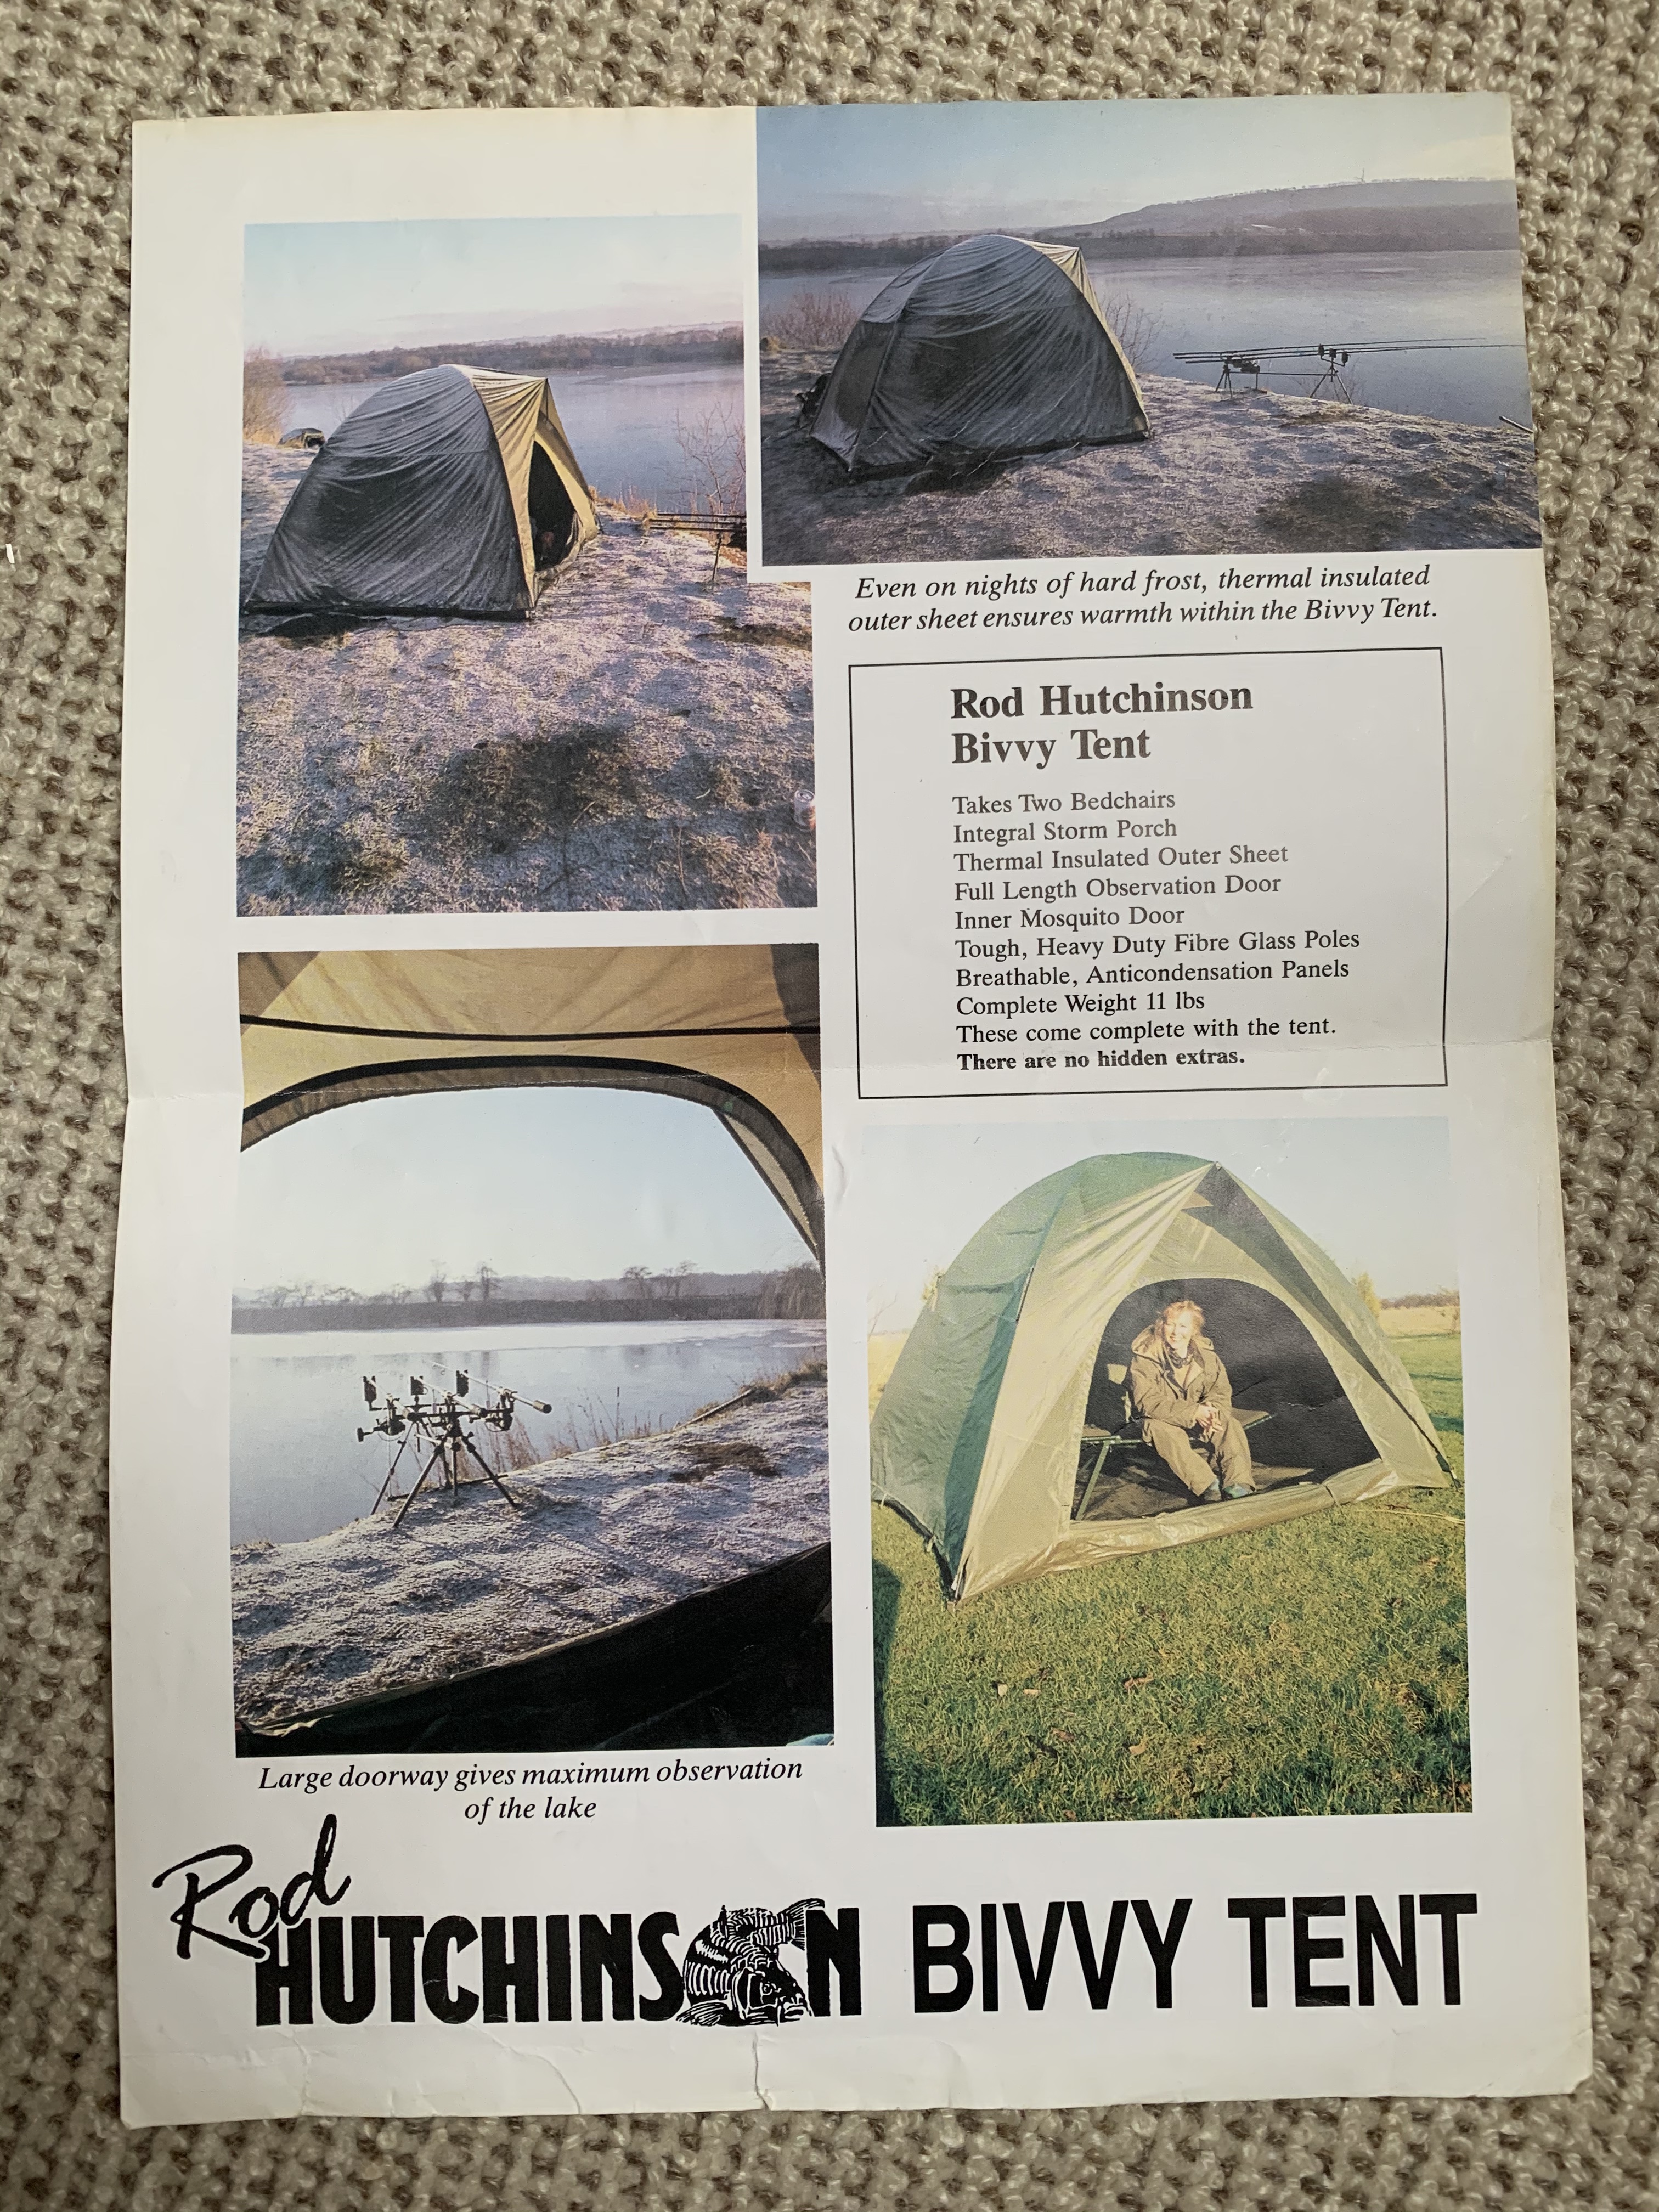 An old advert for the RH bivvy...